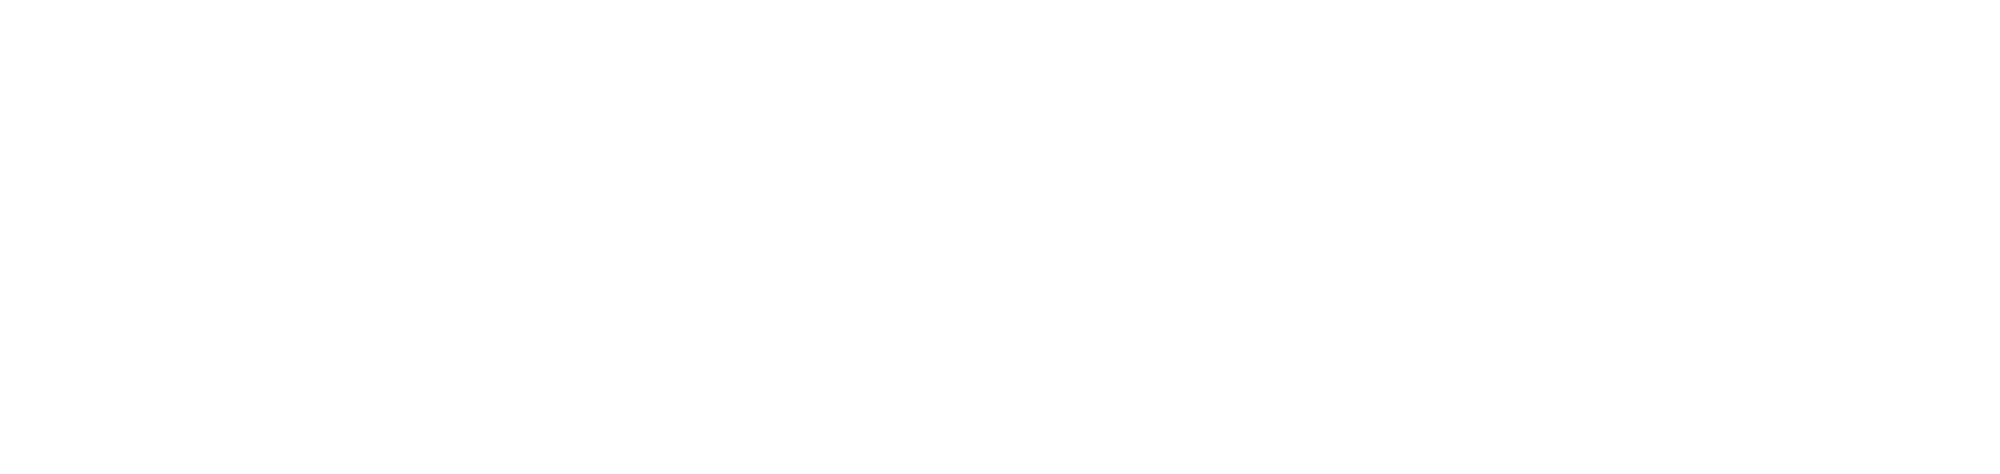 From Vision to Reality: Securing Your Perfect Domain with Domaizing.com's Domain Generator